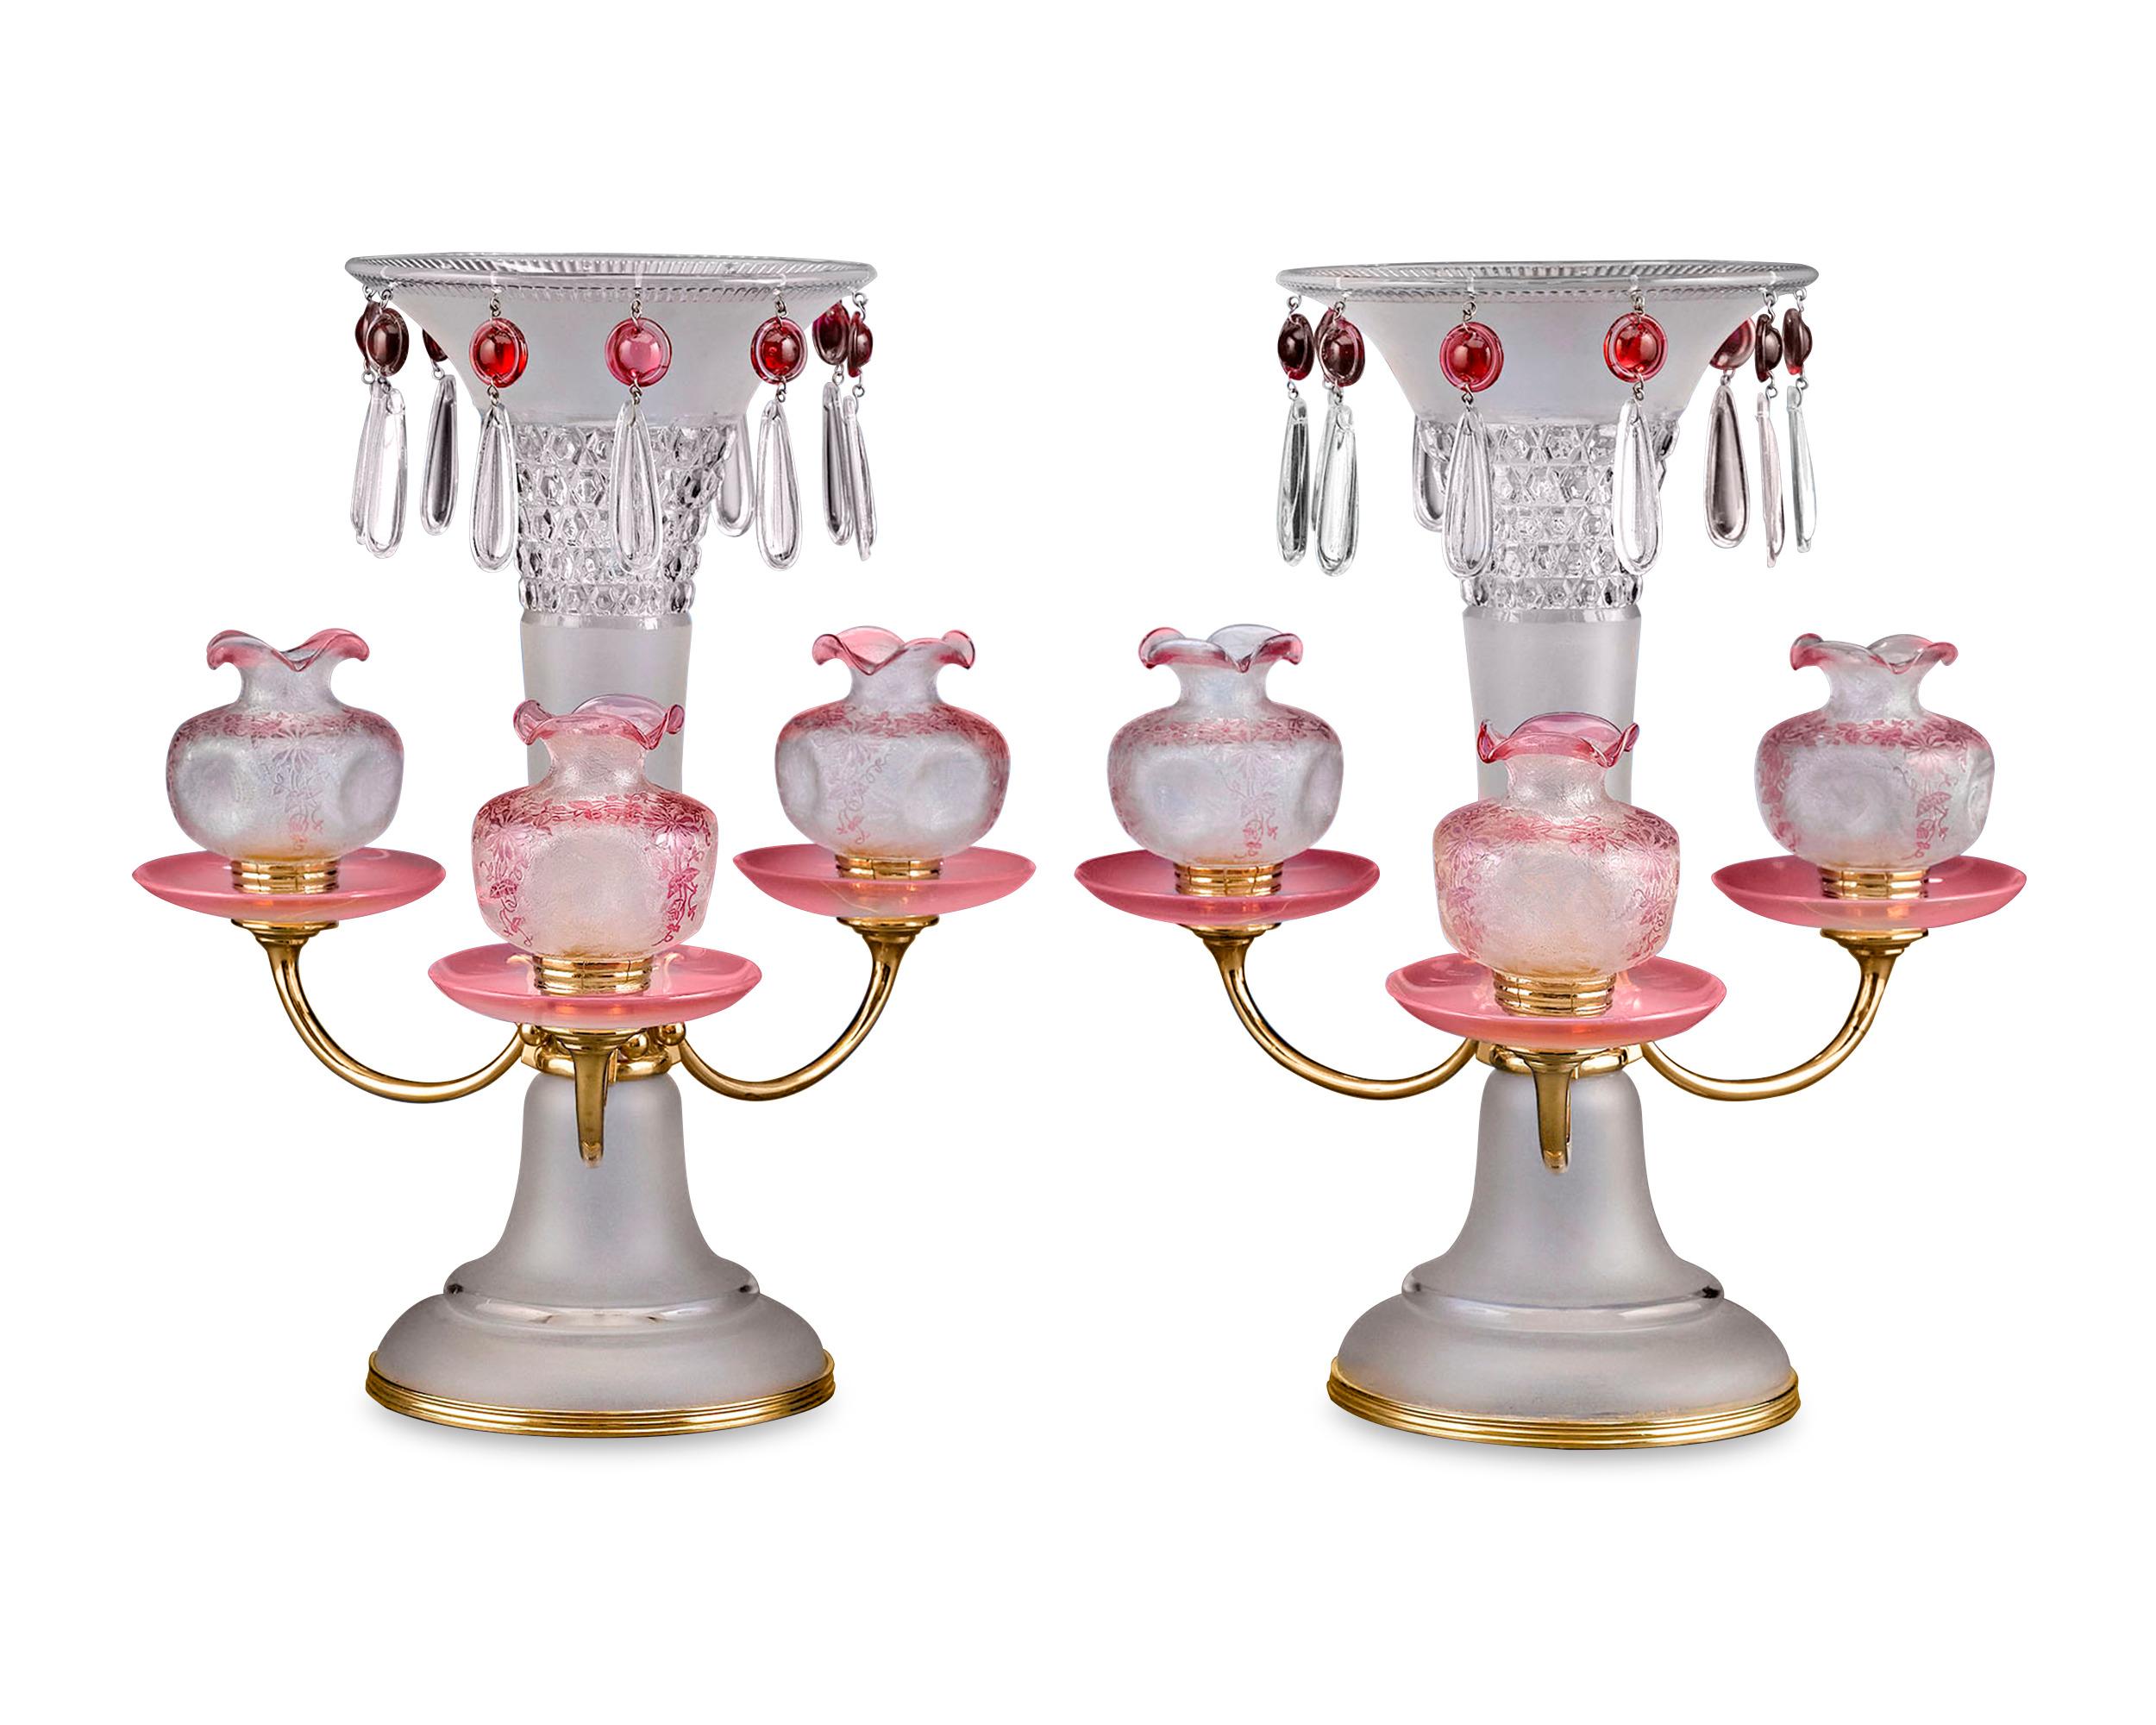 This extraordinary and rare pair of centerpieces beautifully showcase the artistry of Baccarat crystal. Art Nouveau in style, the centerpieces feature large vases of frosted glass with masterfully cut designs at their flared peaks. Teardrop glass